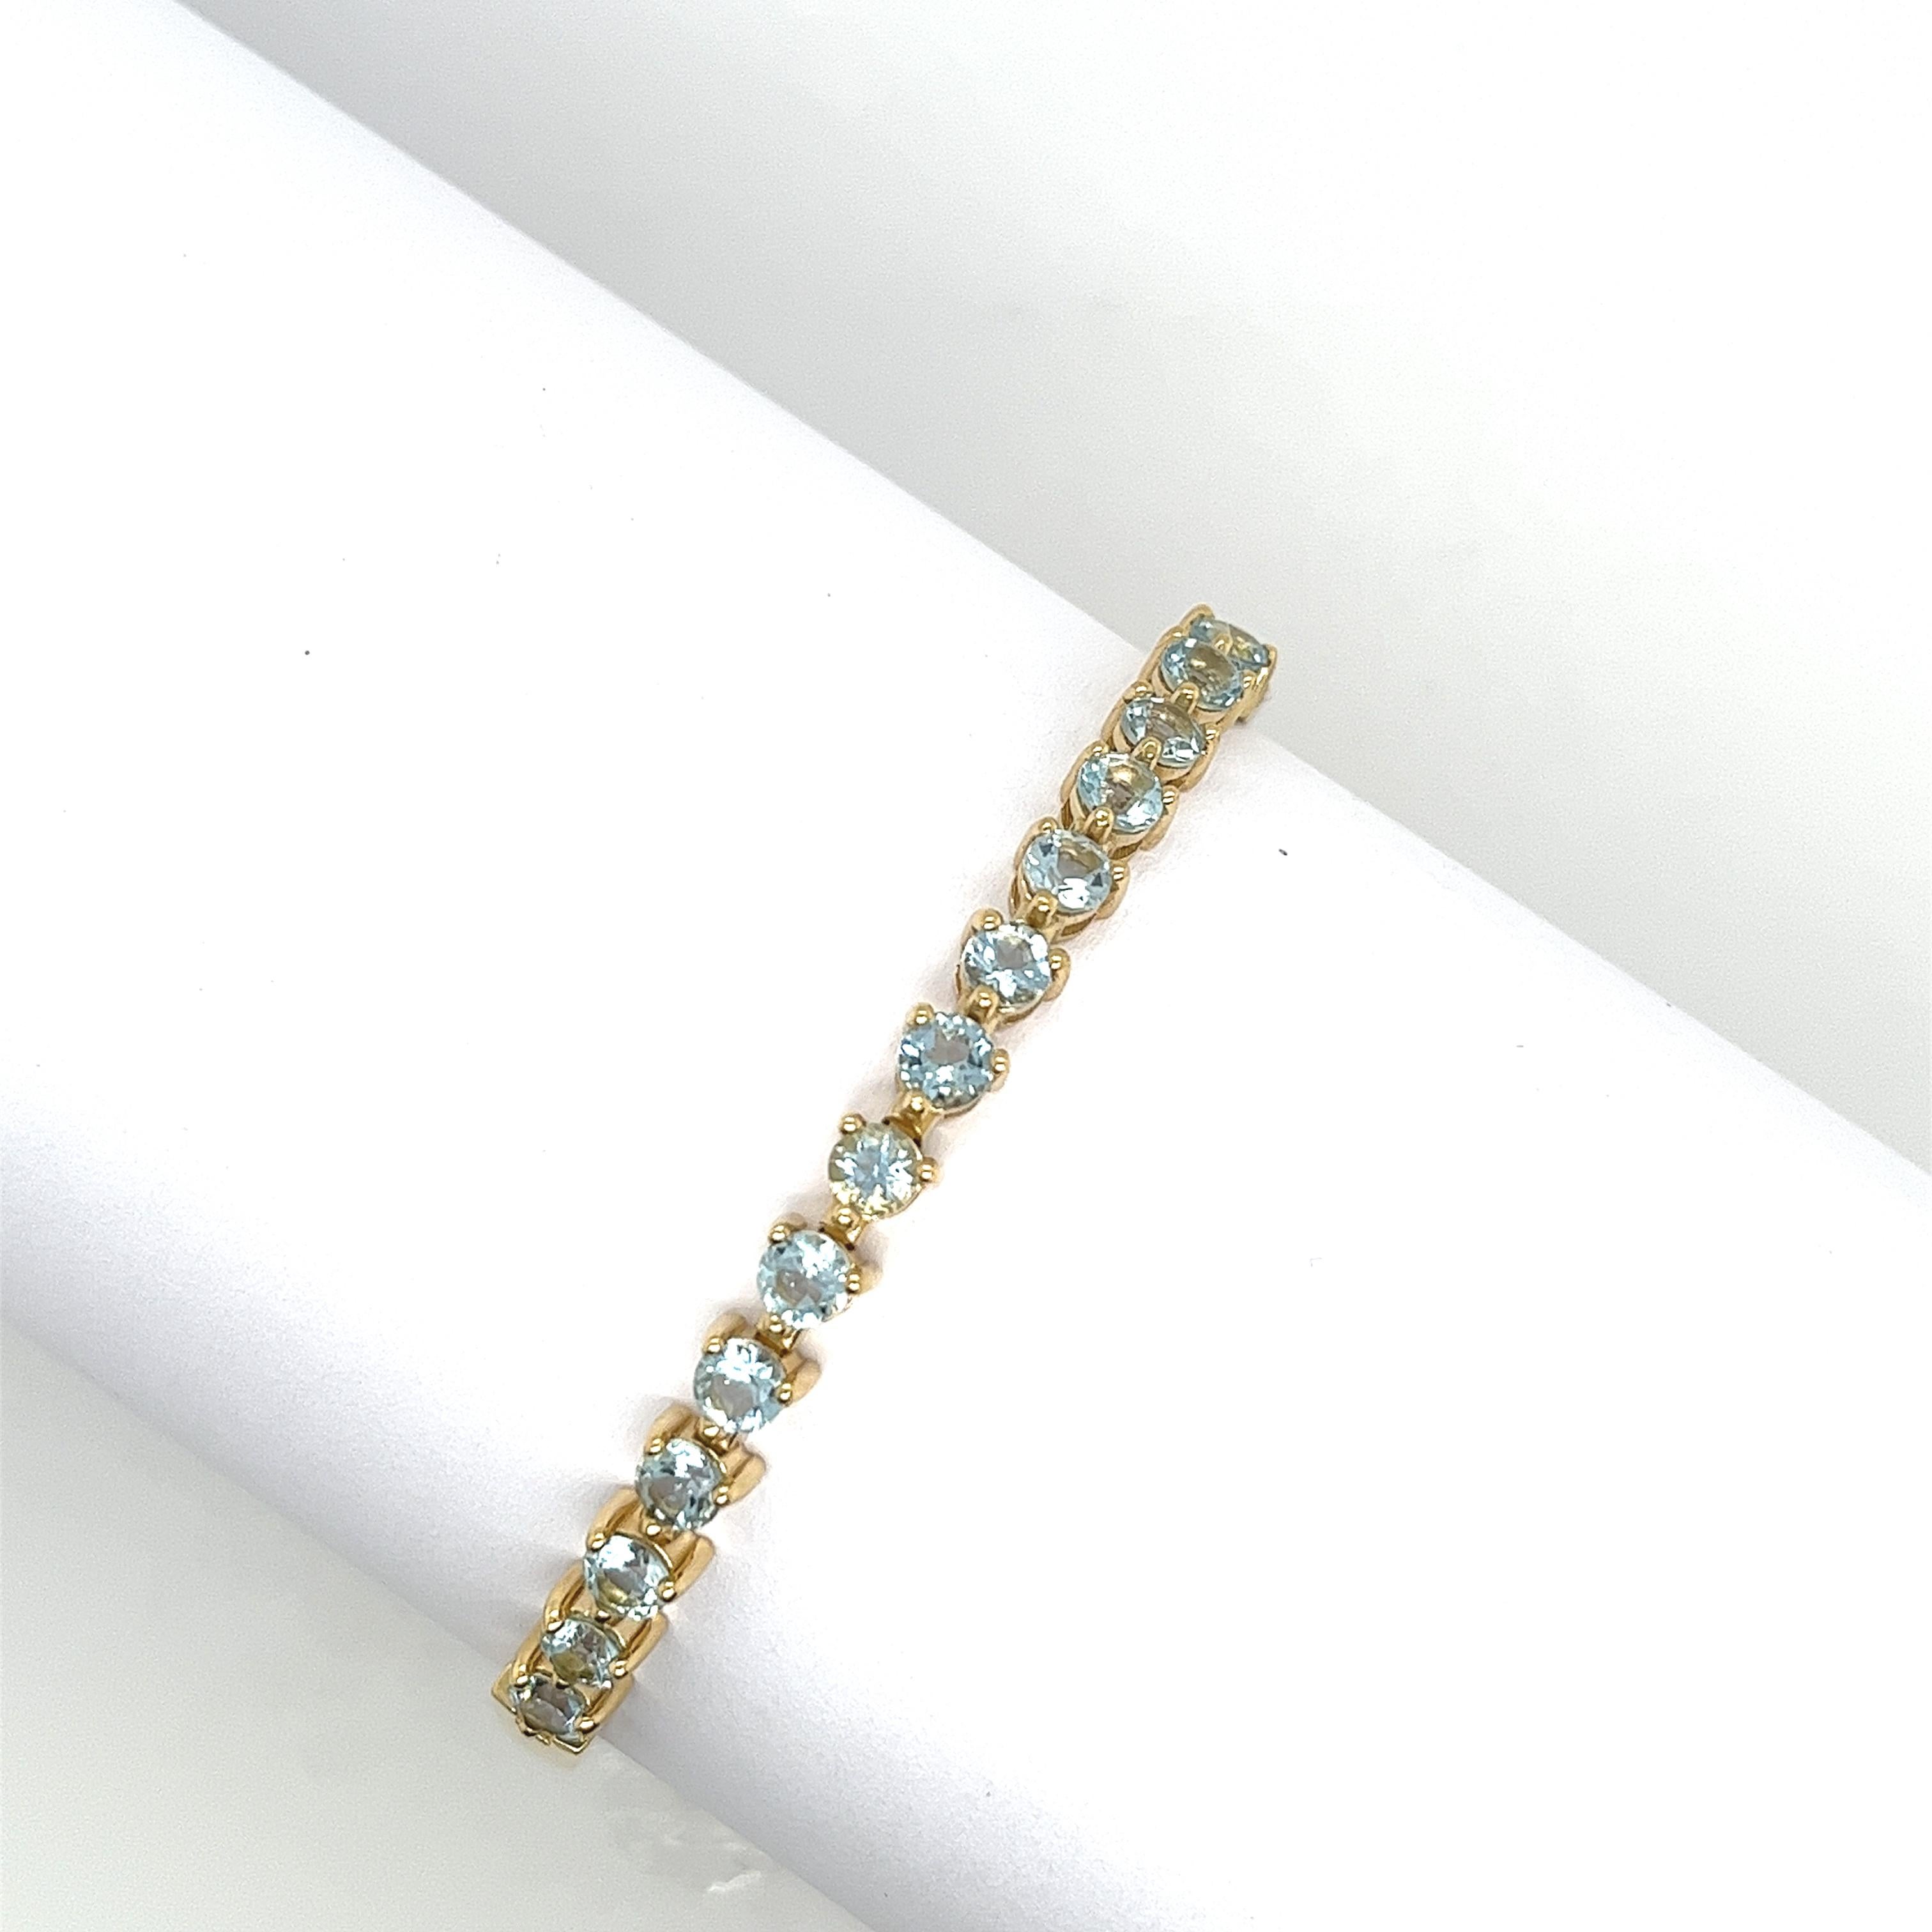 This bracelet is made of 18ct yellow gold and set with 14 round natural fine-quality aquamarines, and has a beautiful shiny finish. This design is ideal for everyday wear.

Total Aquamarine Weight: 2.15ct
Total Weight: 12.3g
Bracelet Length: